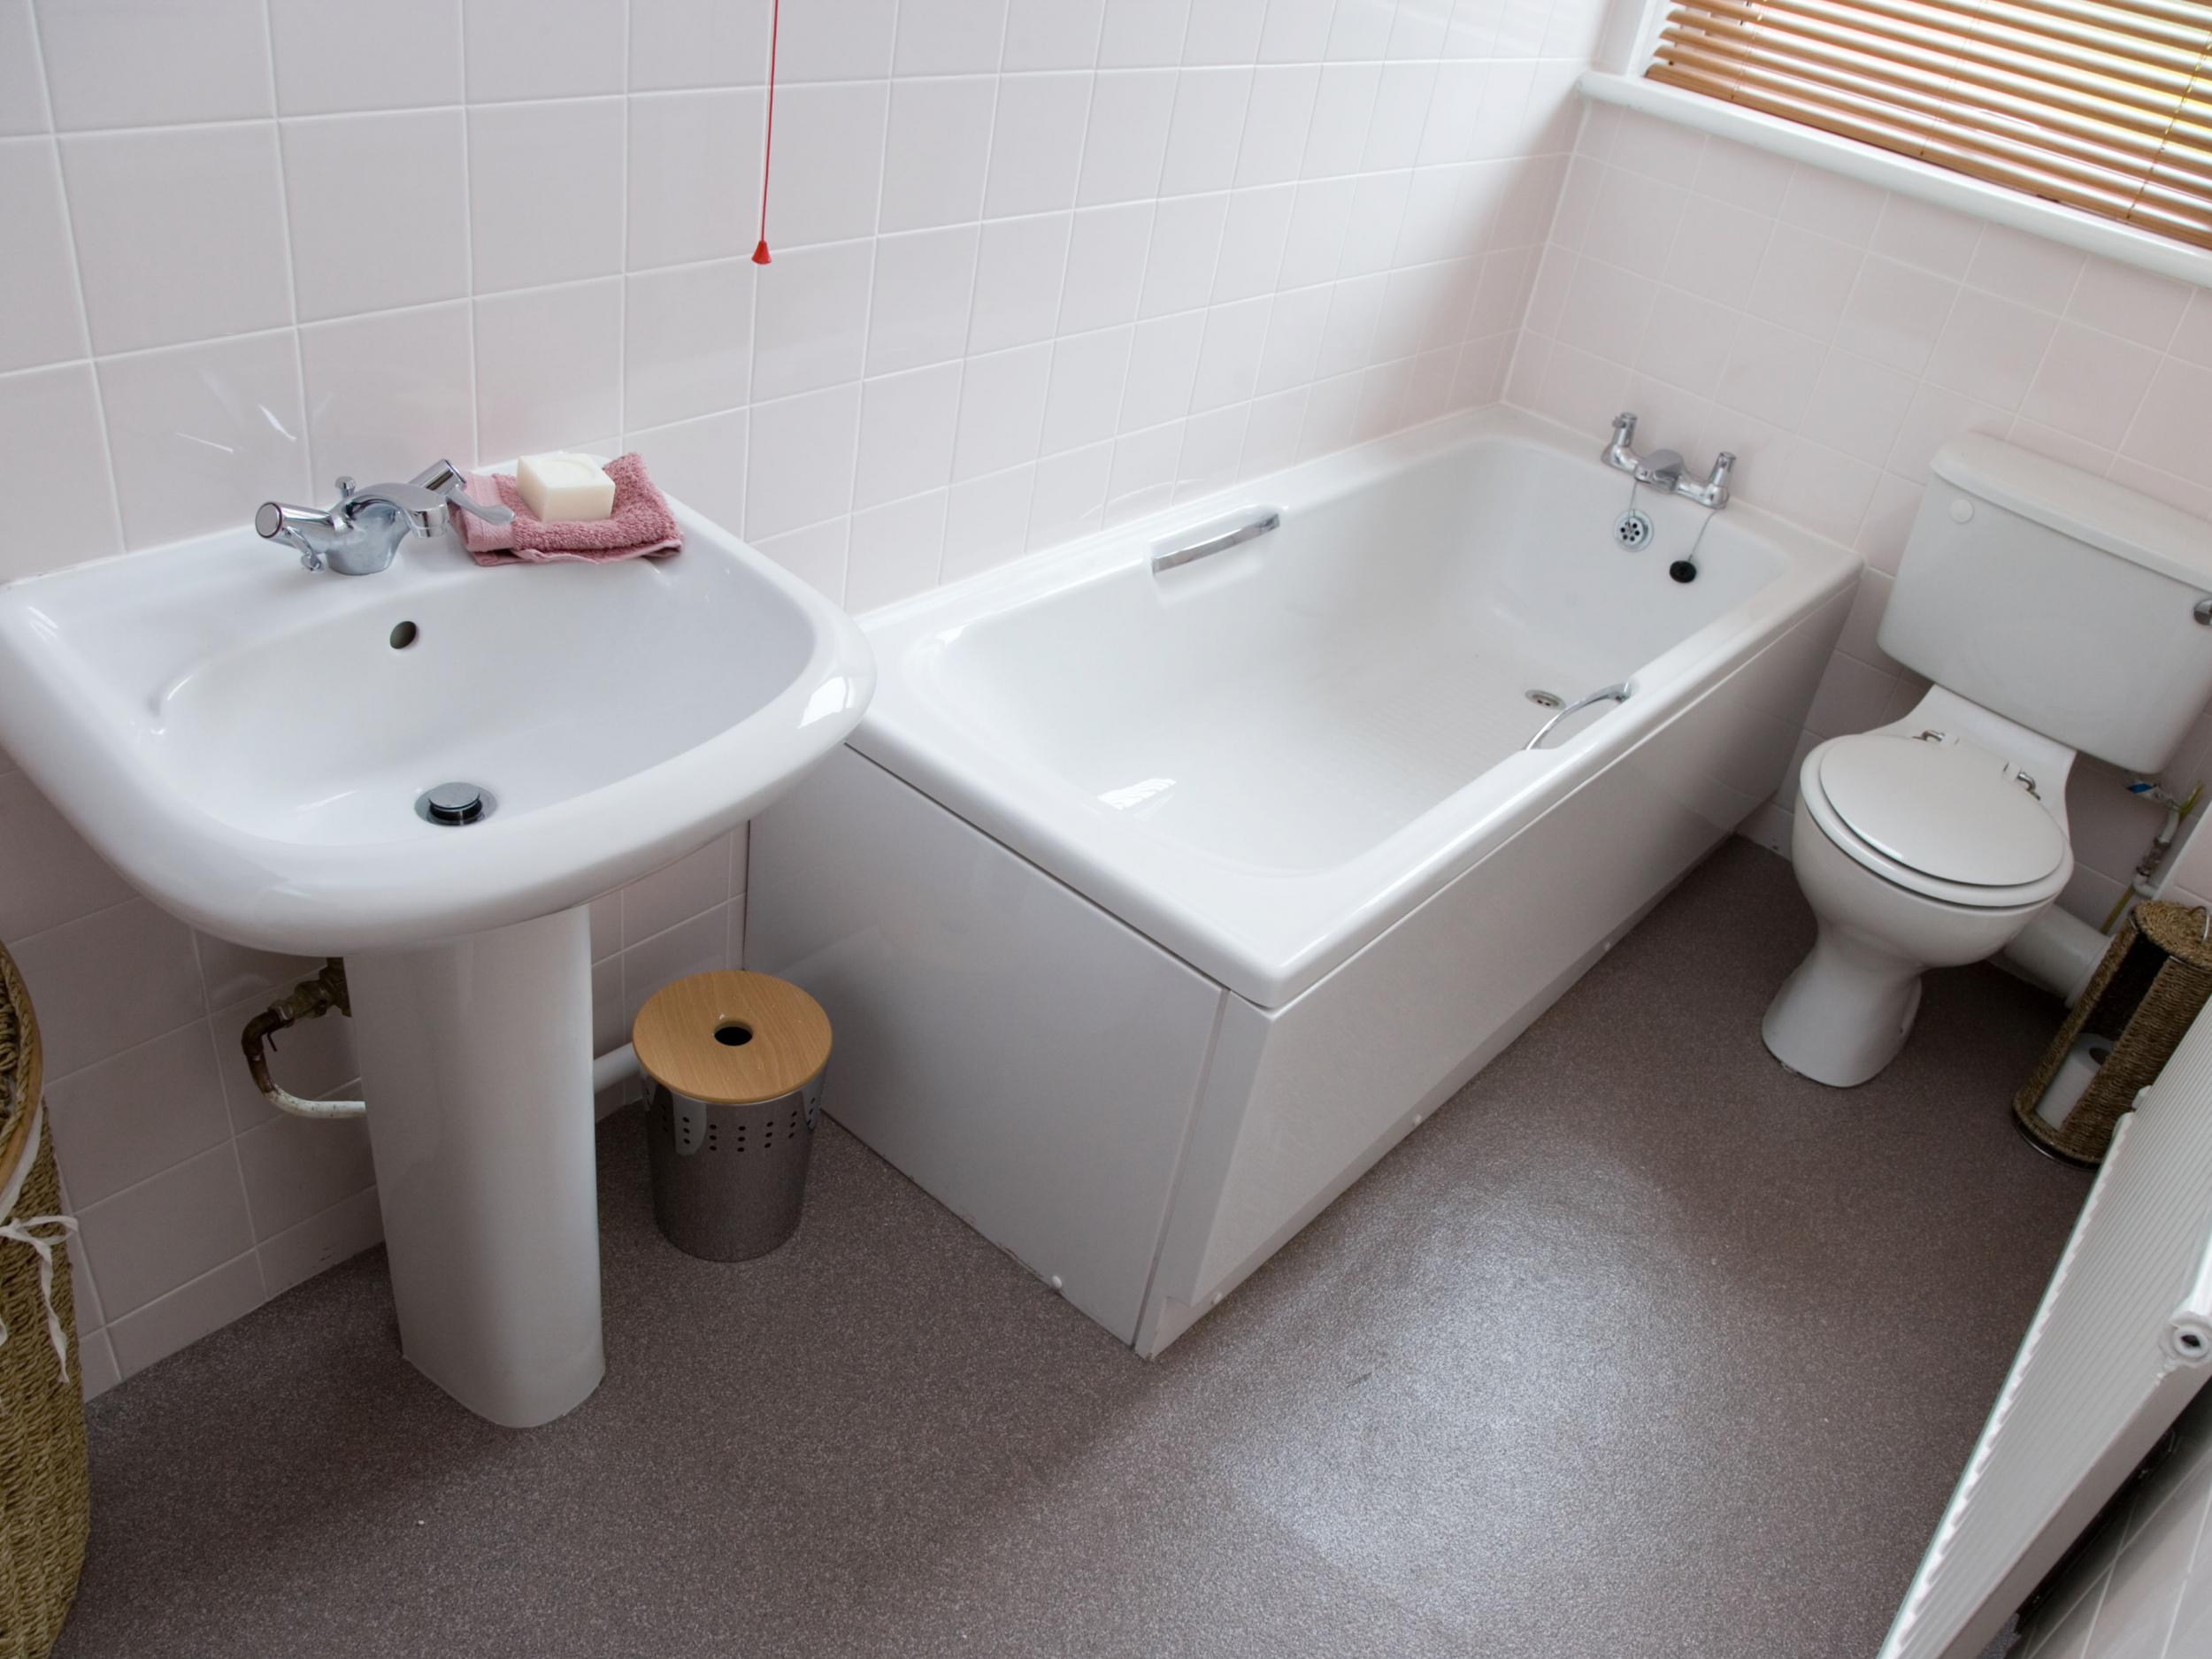 An elderly man returned home to find an intruder in his bath